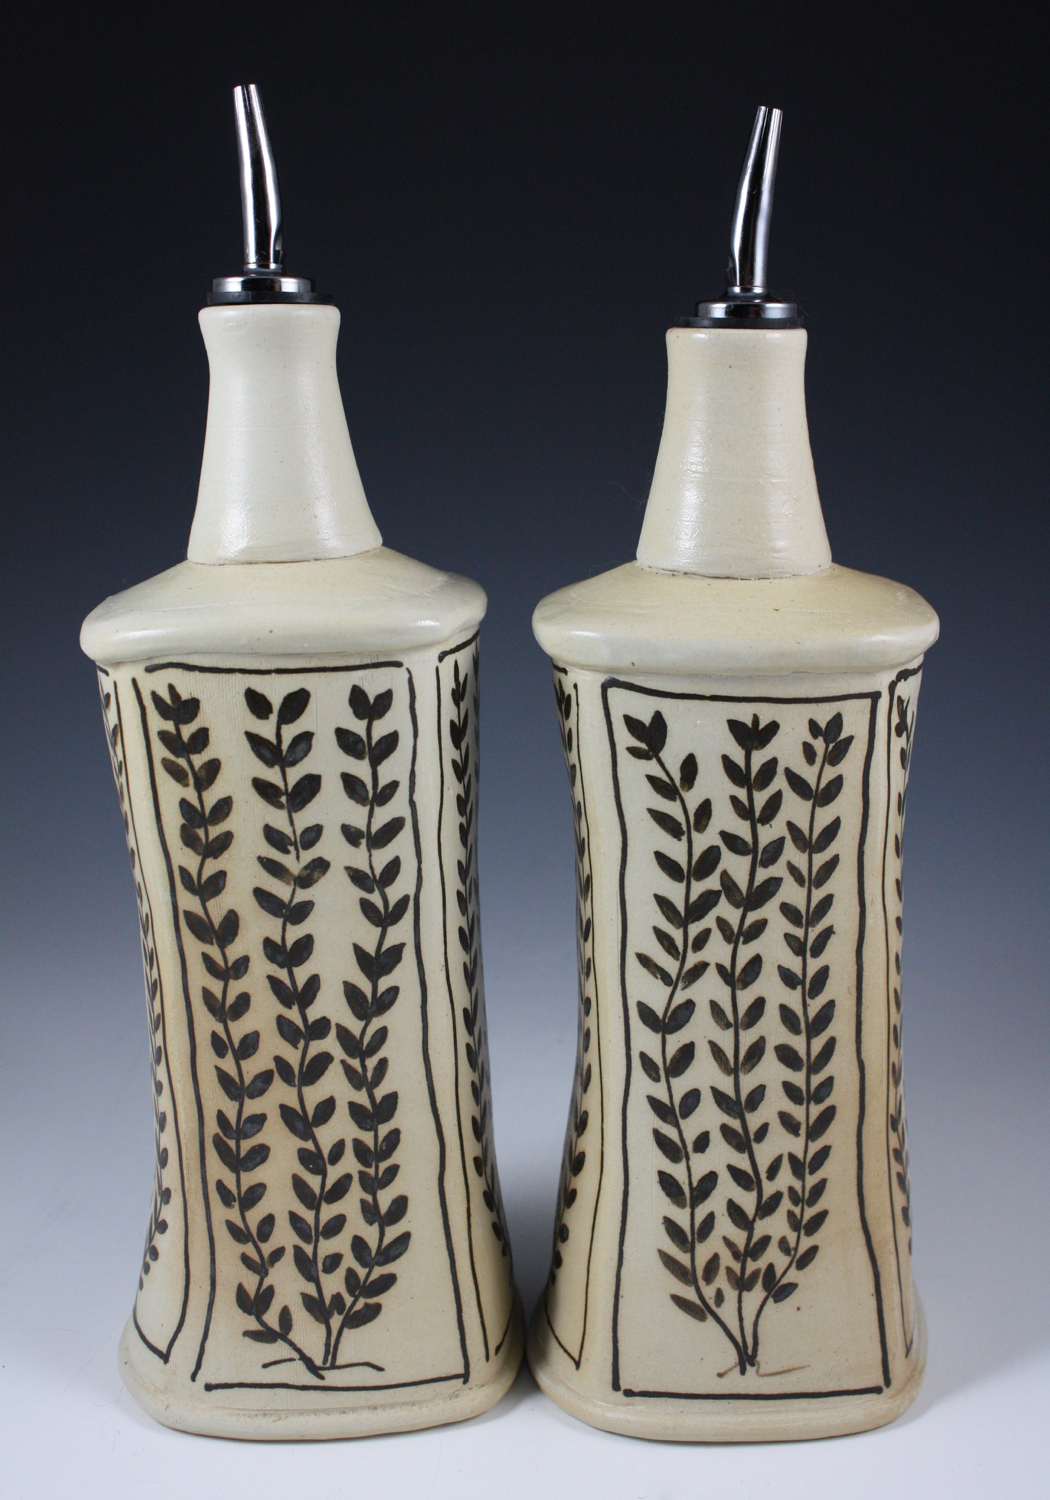 Oil Bottles with Wheat Design